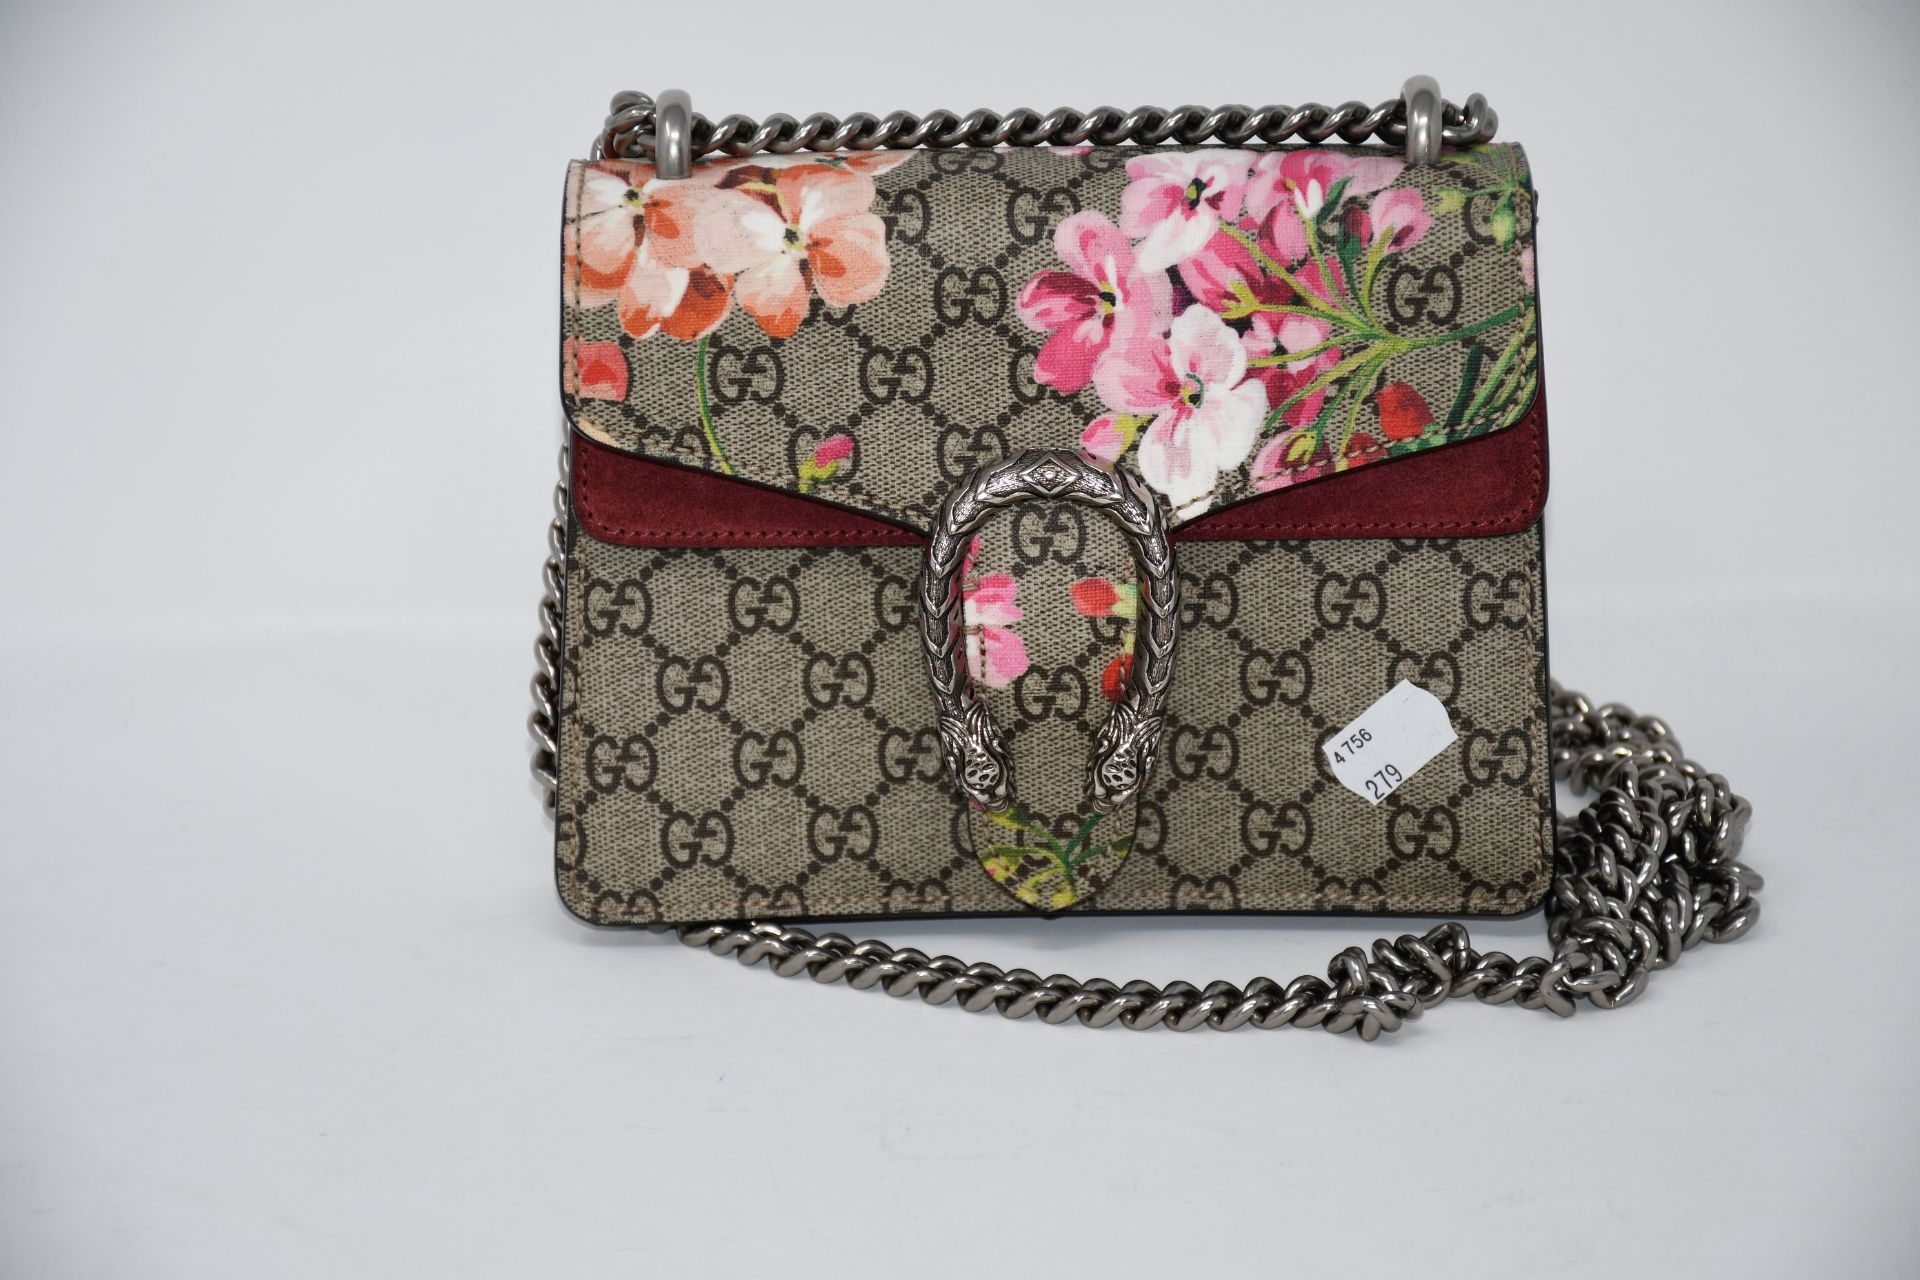 One as new Gucci Dionysus GG Blooms mini bag (7555F 8402).